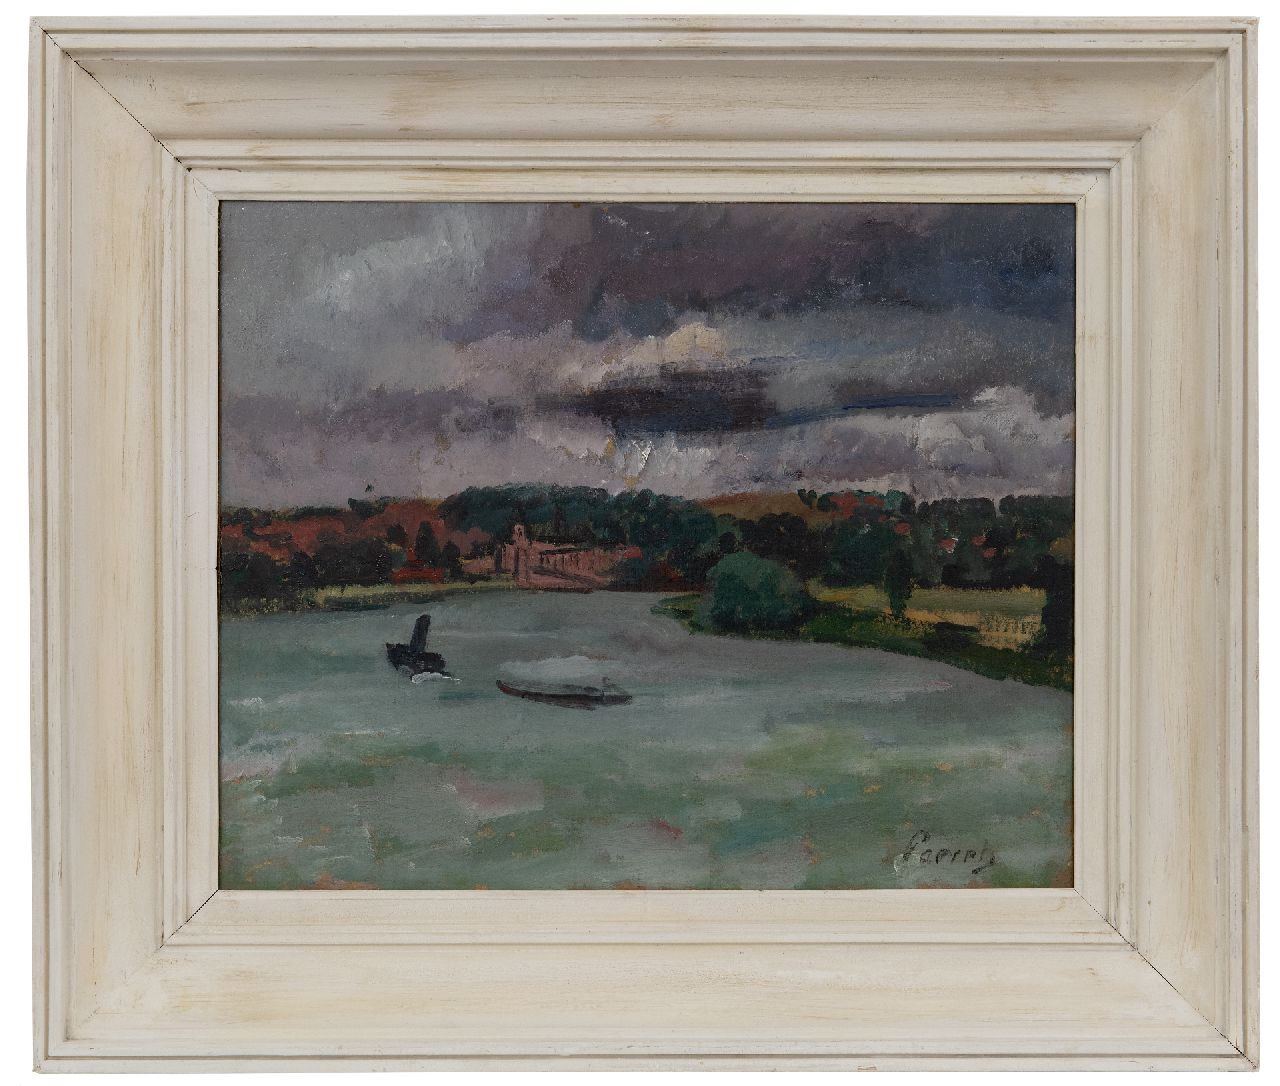 Paerels W.A.  | 'Willem' Adriaan Paerels | Paintings offered for sale | Shipping on a river, oil on canvas 39.7 x 49.1 cm, signed l.r.